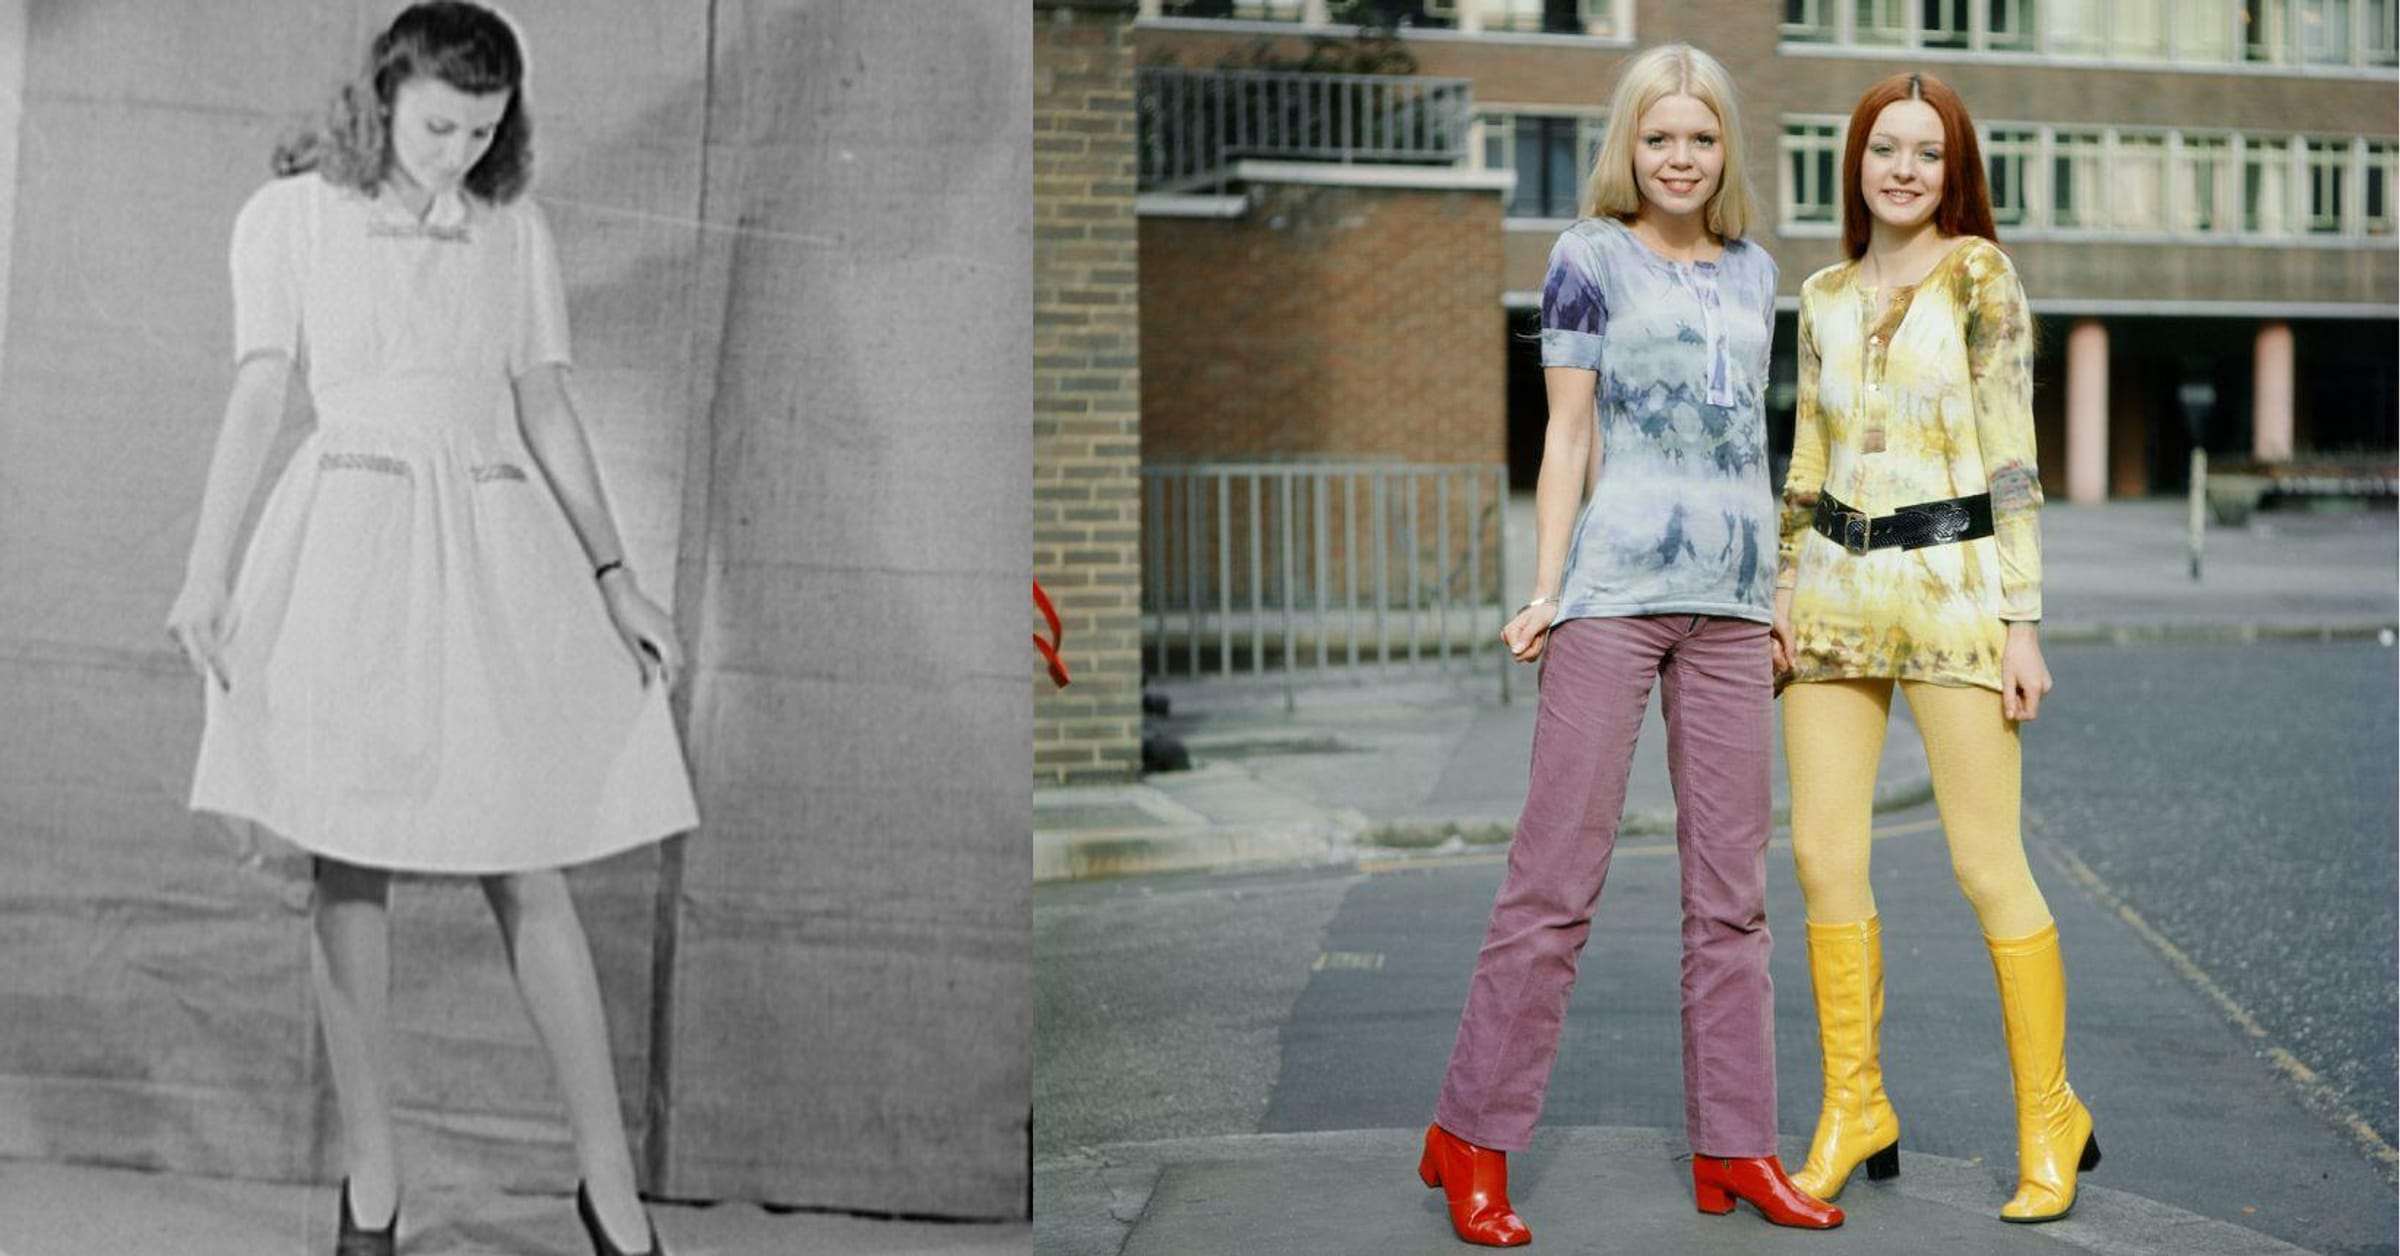 The fashion trends that defined the decade